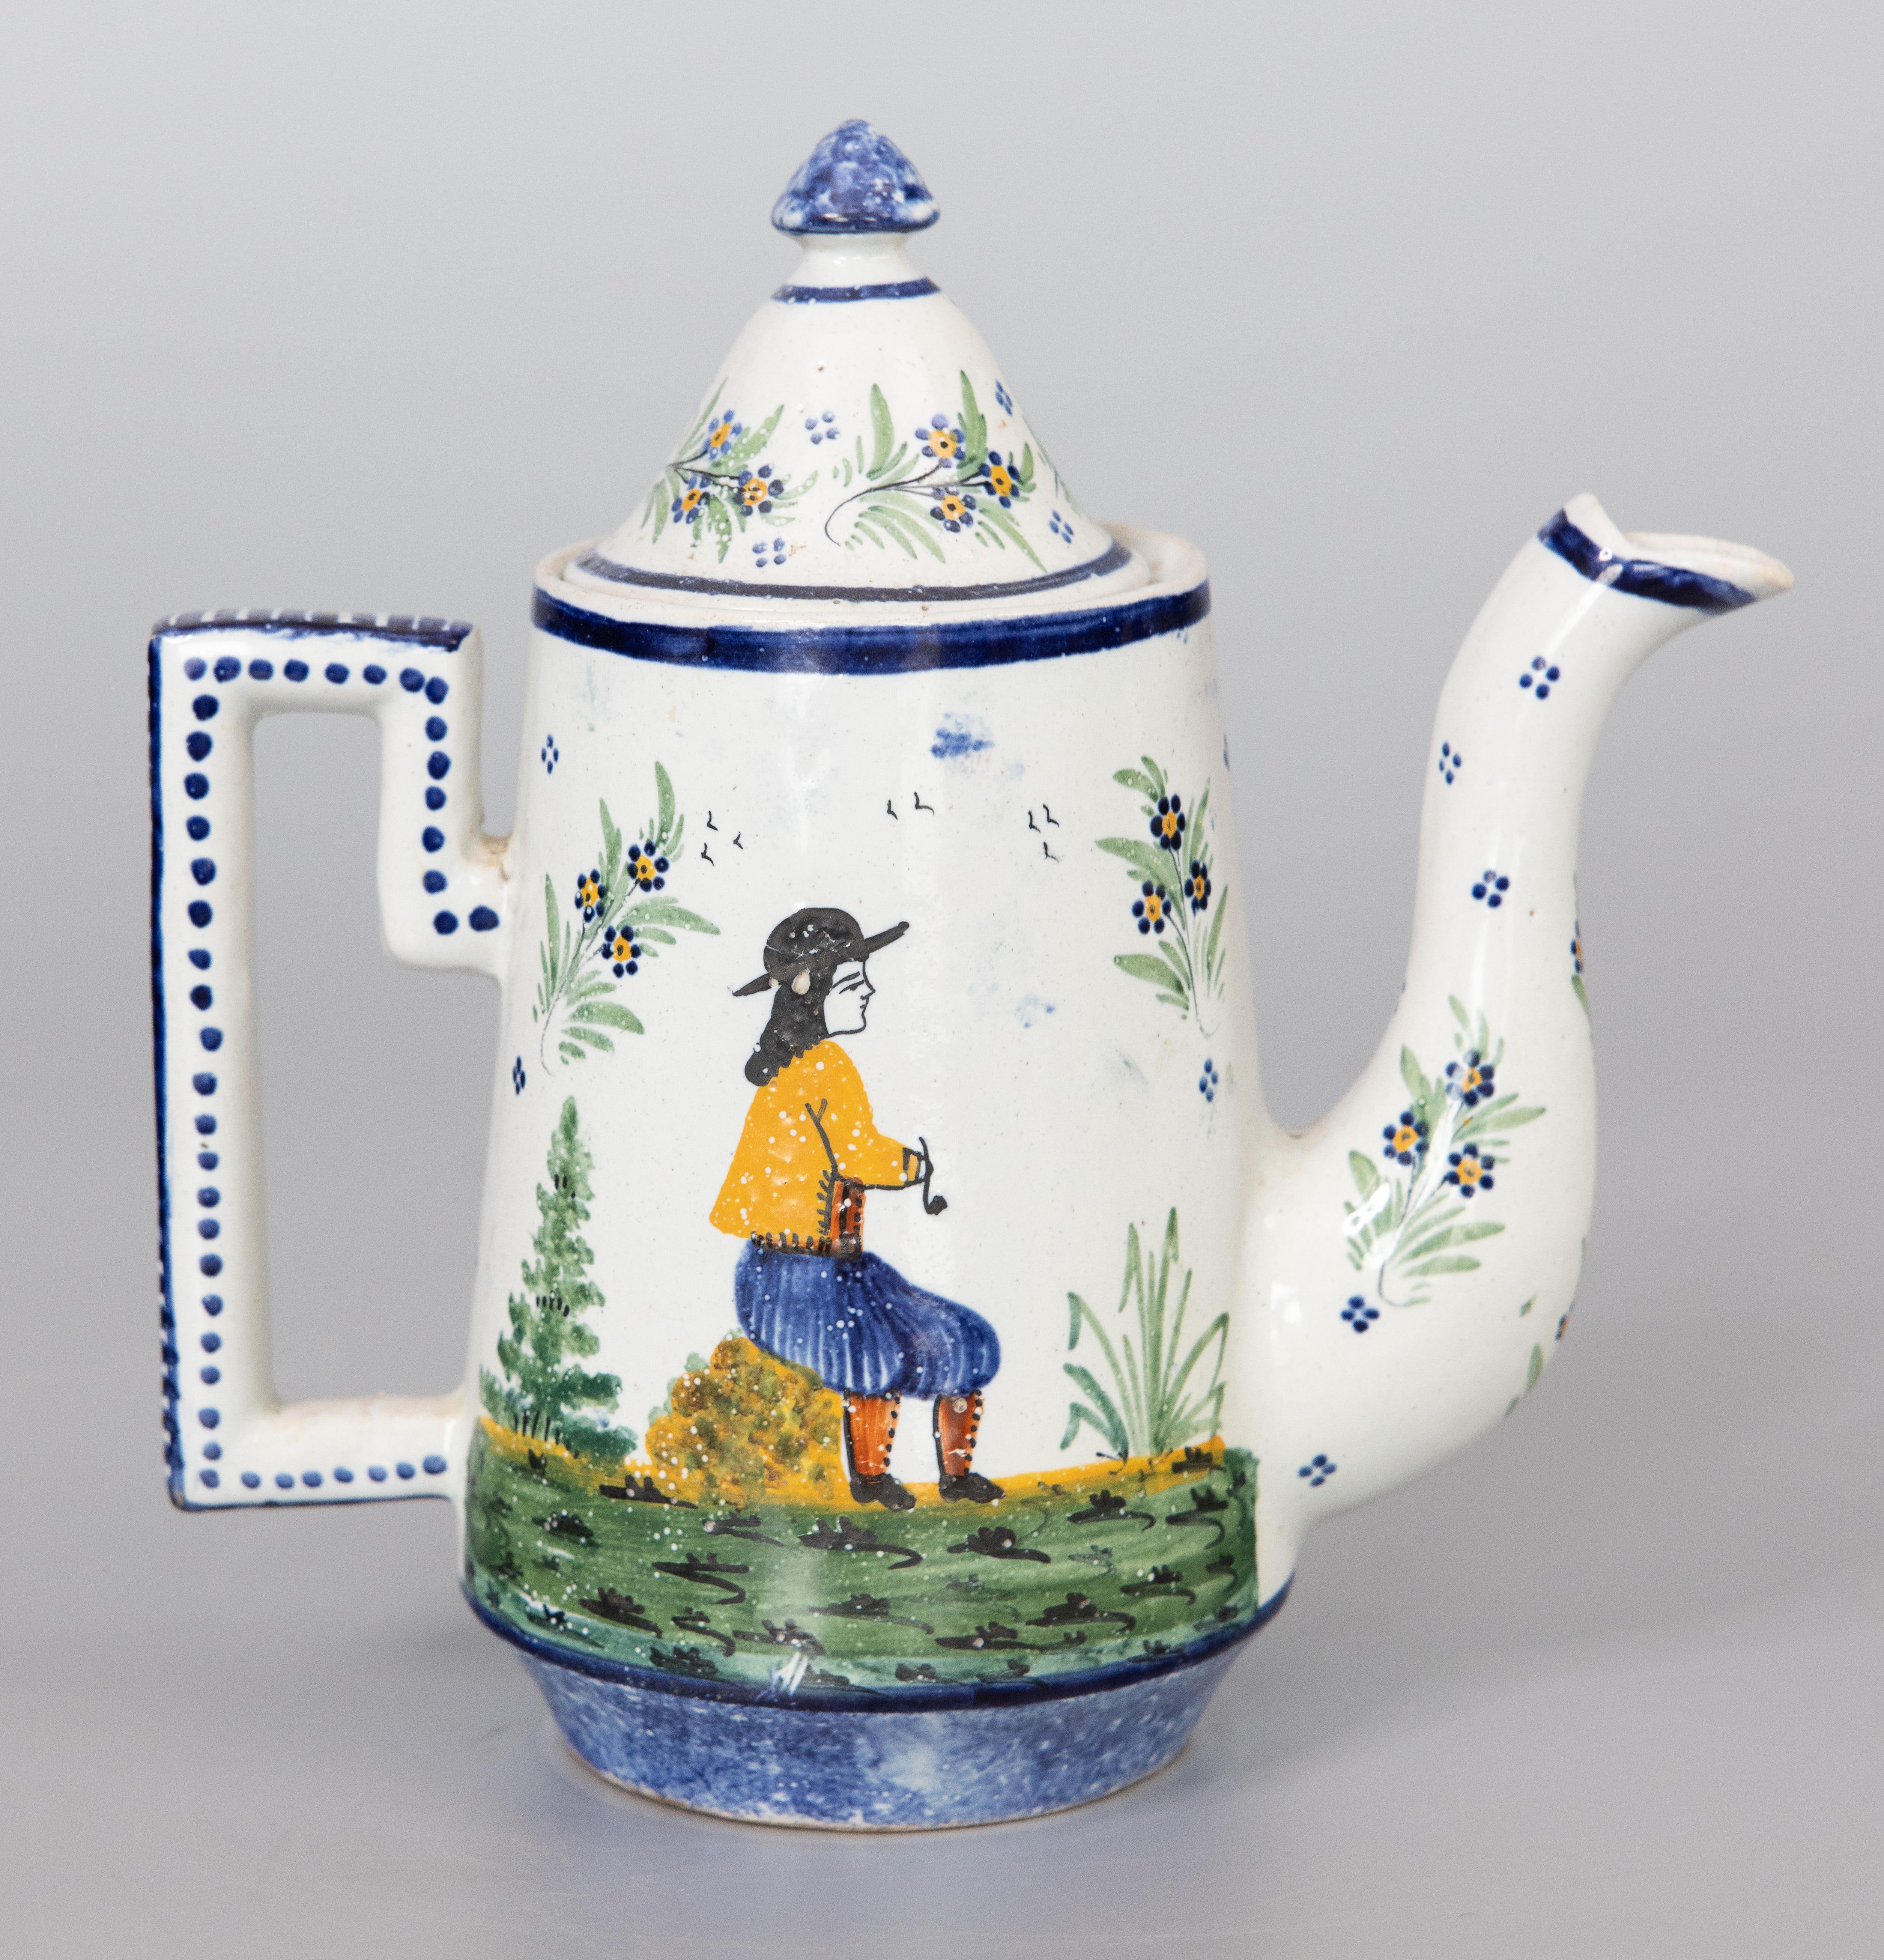 A superb antique French provincial faience Quimper lidded teapot, circa 1890. The base is signed HB Quimper for the Hubaudière Potteries. This charming tea pot depicts a young Breton woman picking flowers and the opposite side depicts a young man